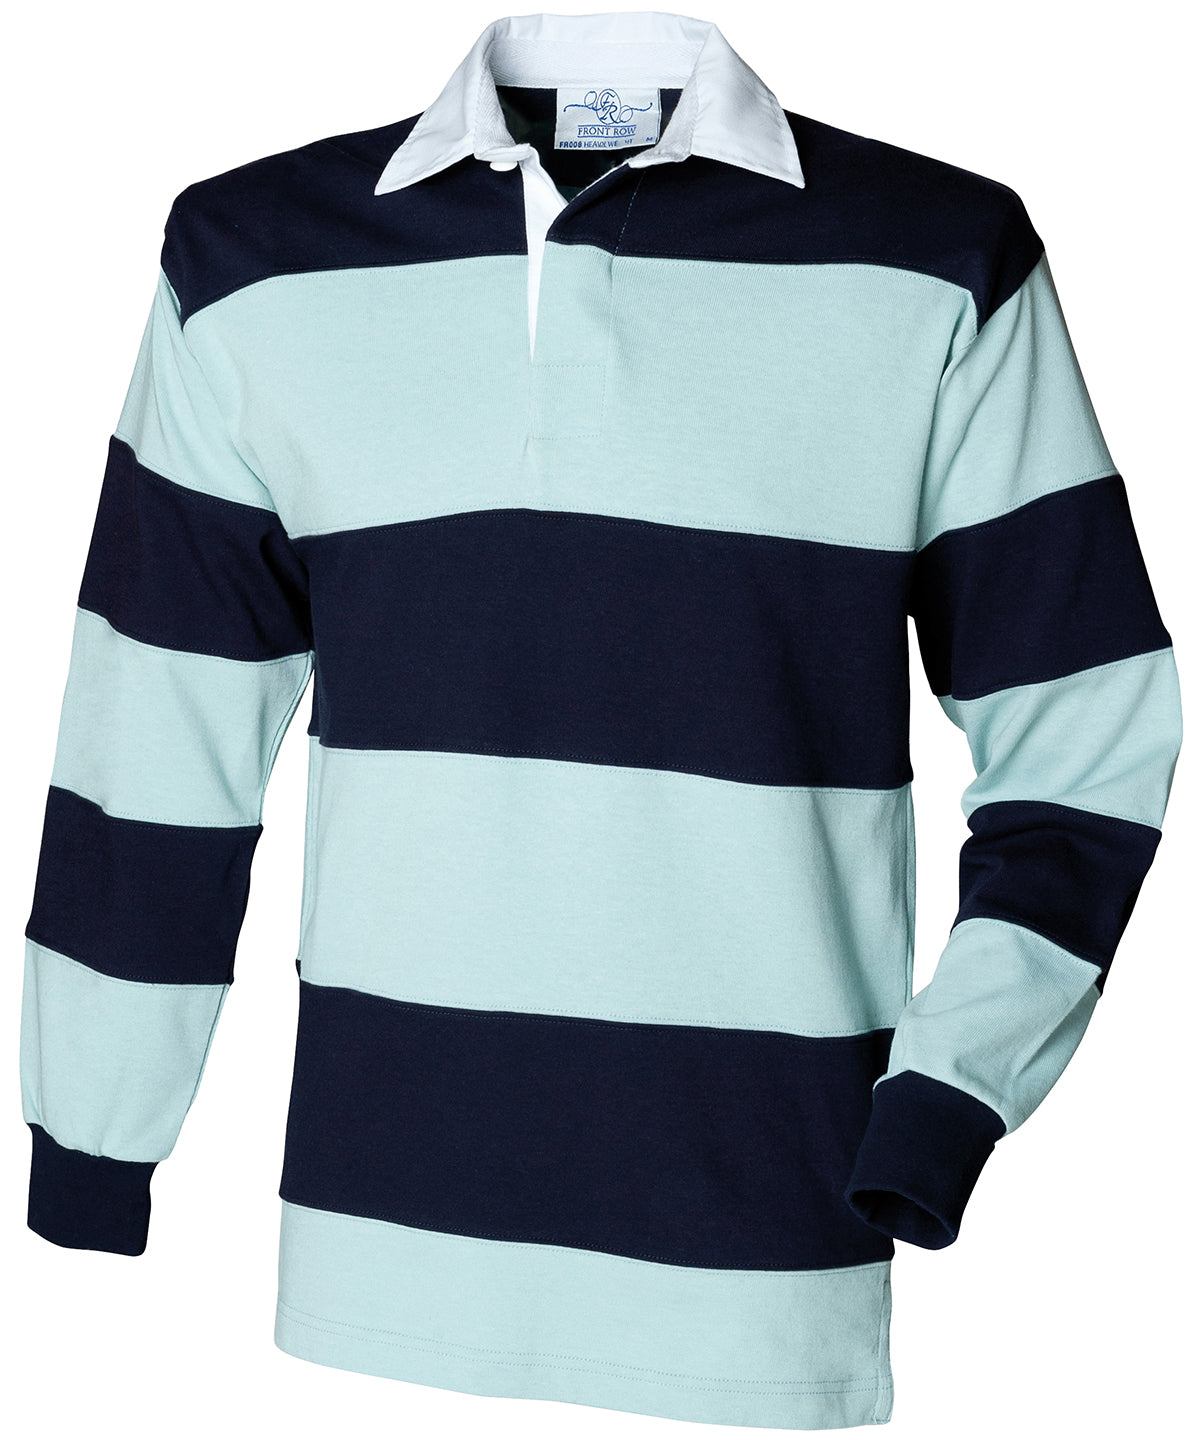 Personalised Polo Shirts - Stripes Front Row Sewn stripe long sleeve rugby shirt